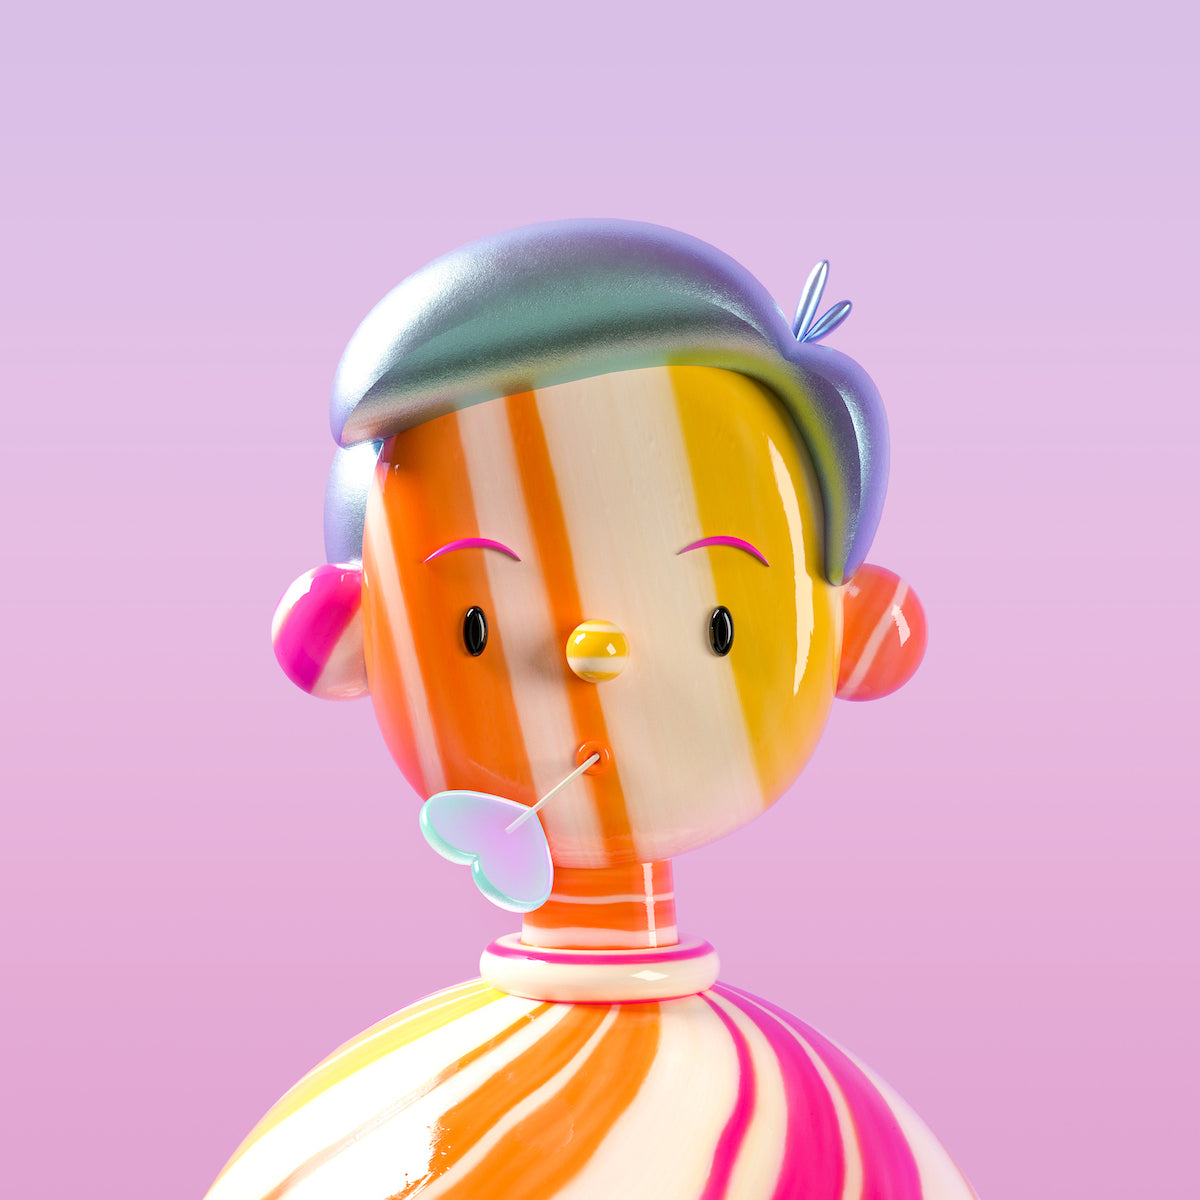 Candy Toy Face by Amrit Pal Singh